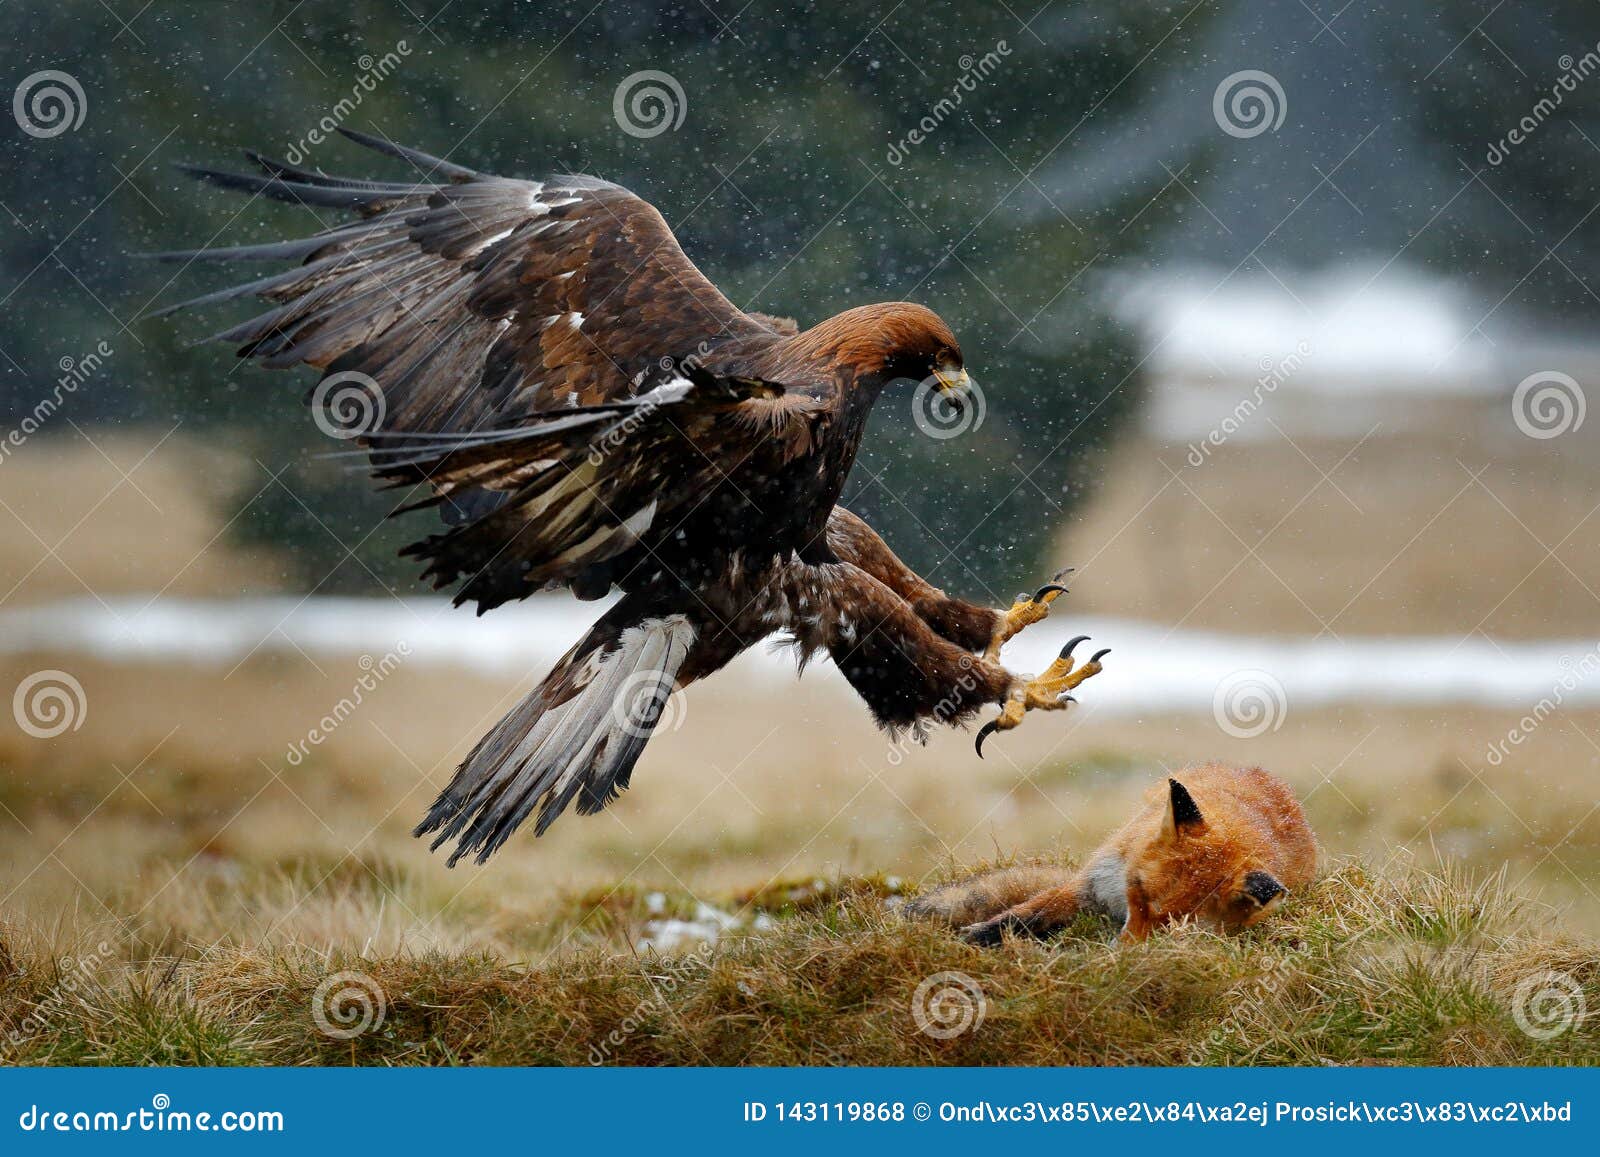 golden eagle feeding on kill red fox in the forest during rain and snowfall. bird behaviour in the nature. behaviour scene with